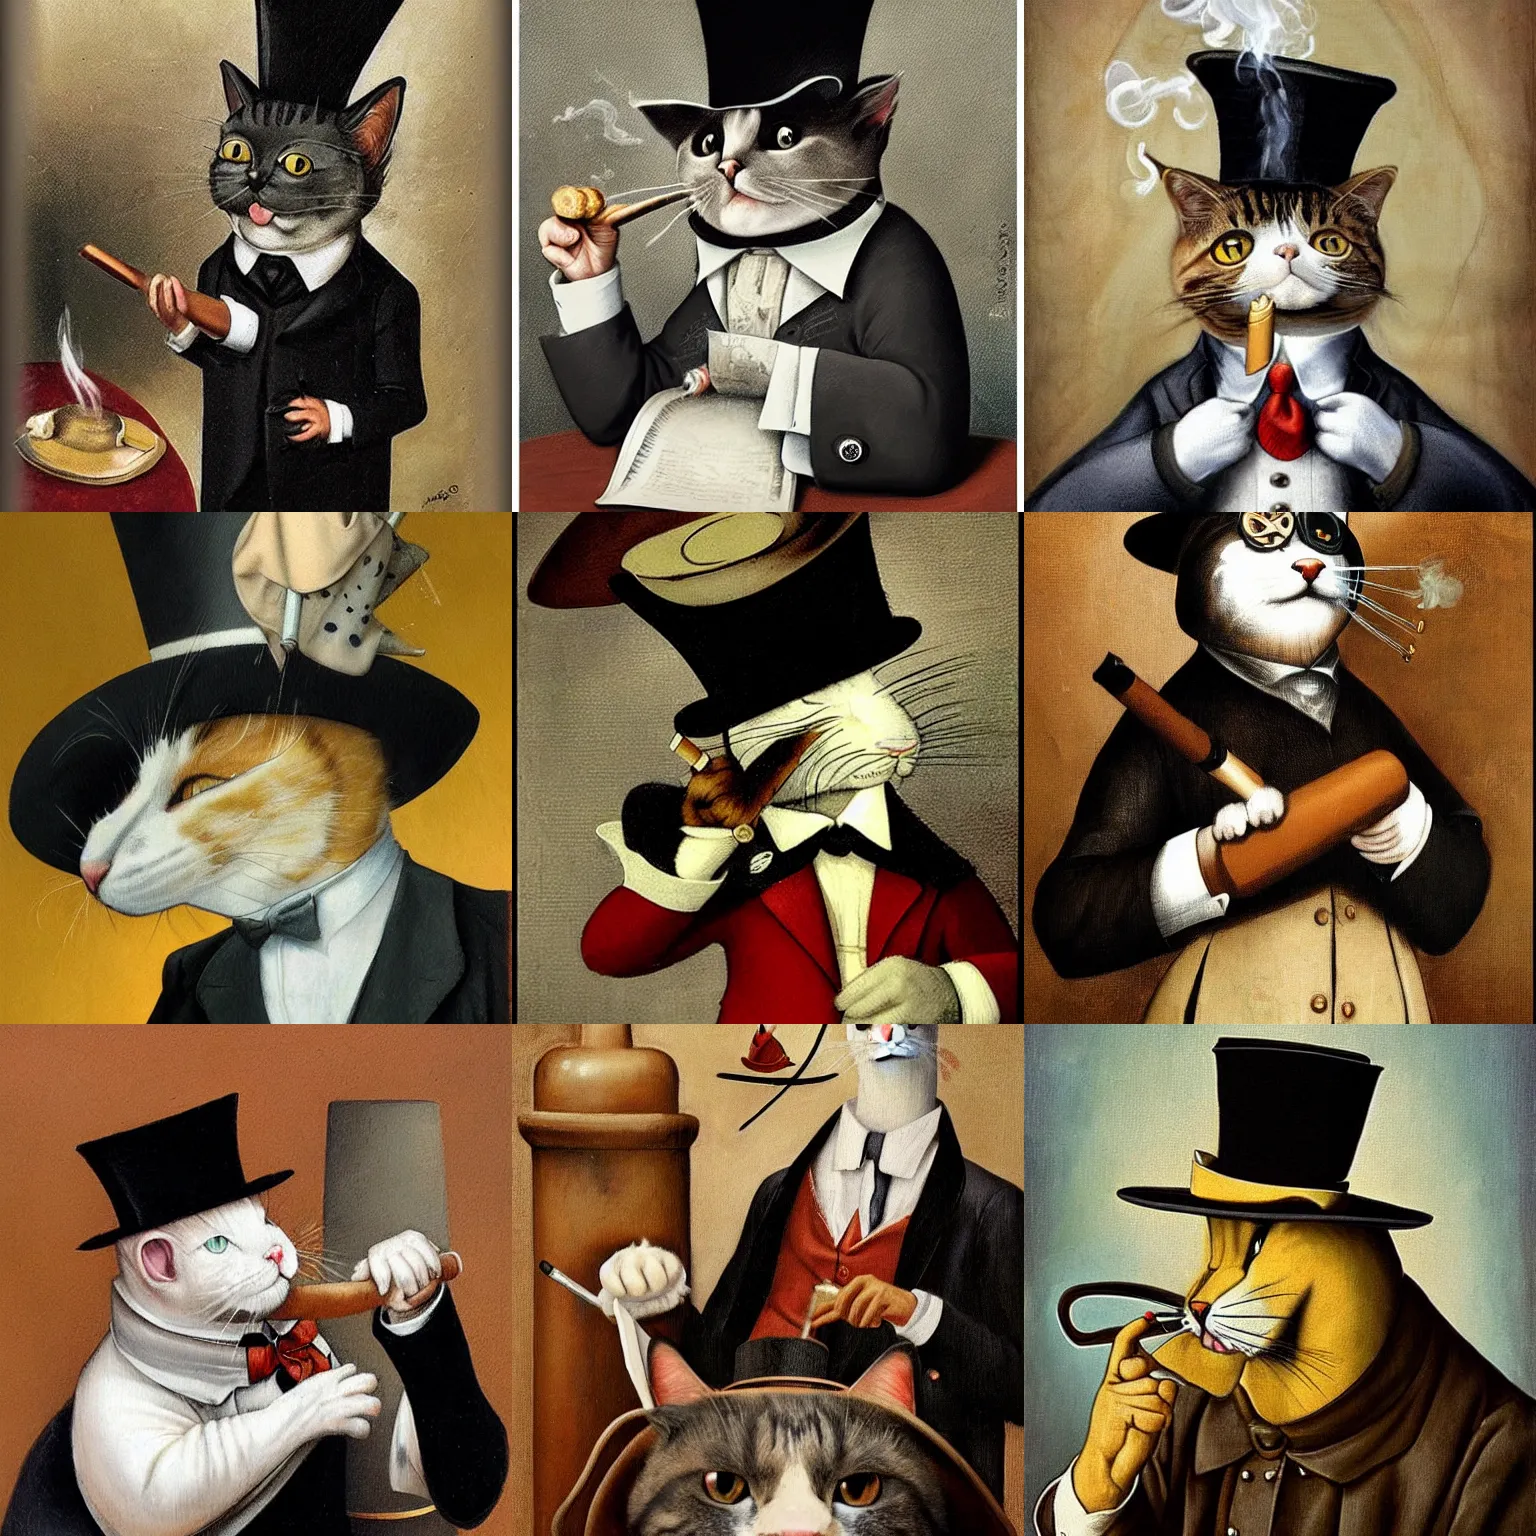 Prompt: cat wearing a top hat and suit, smoking a cigar, hieronymus bosch, mark brooks